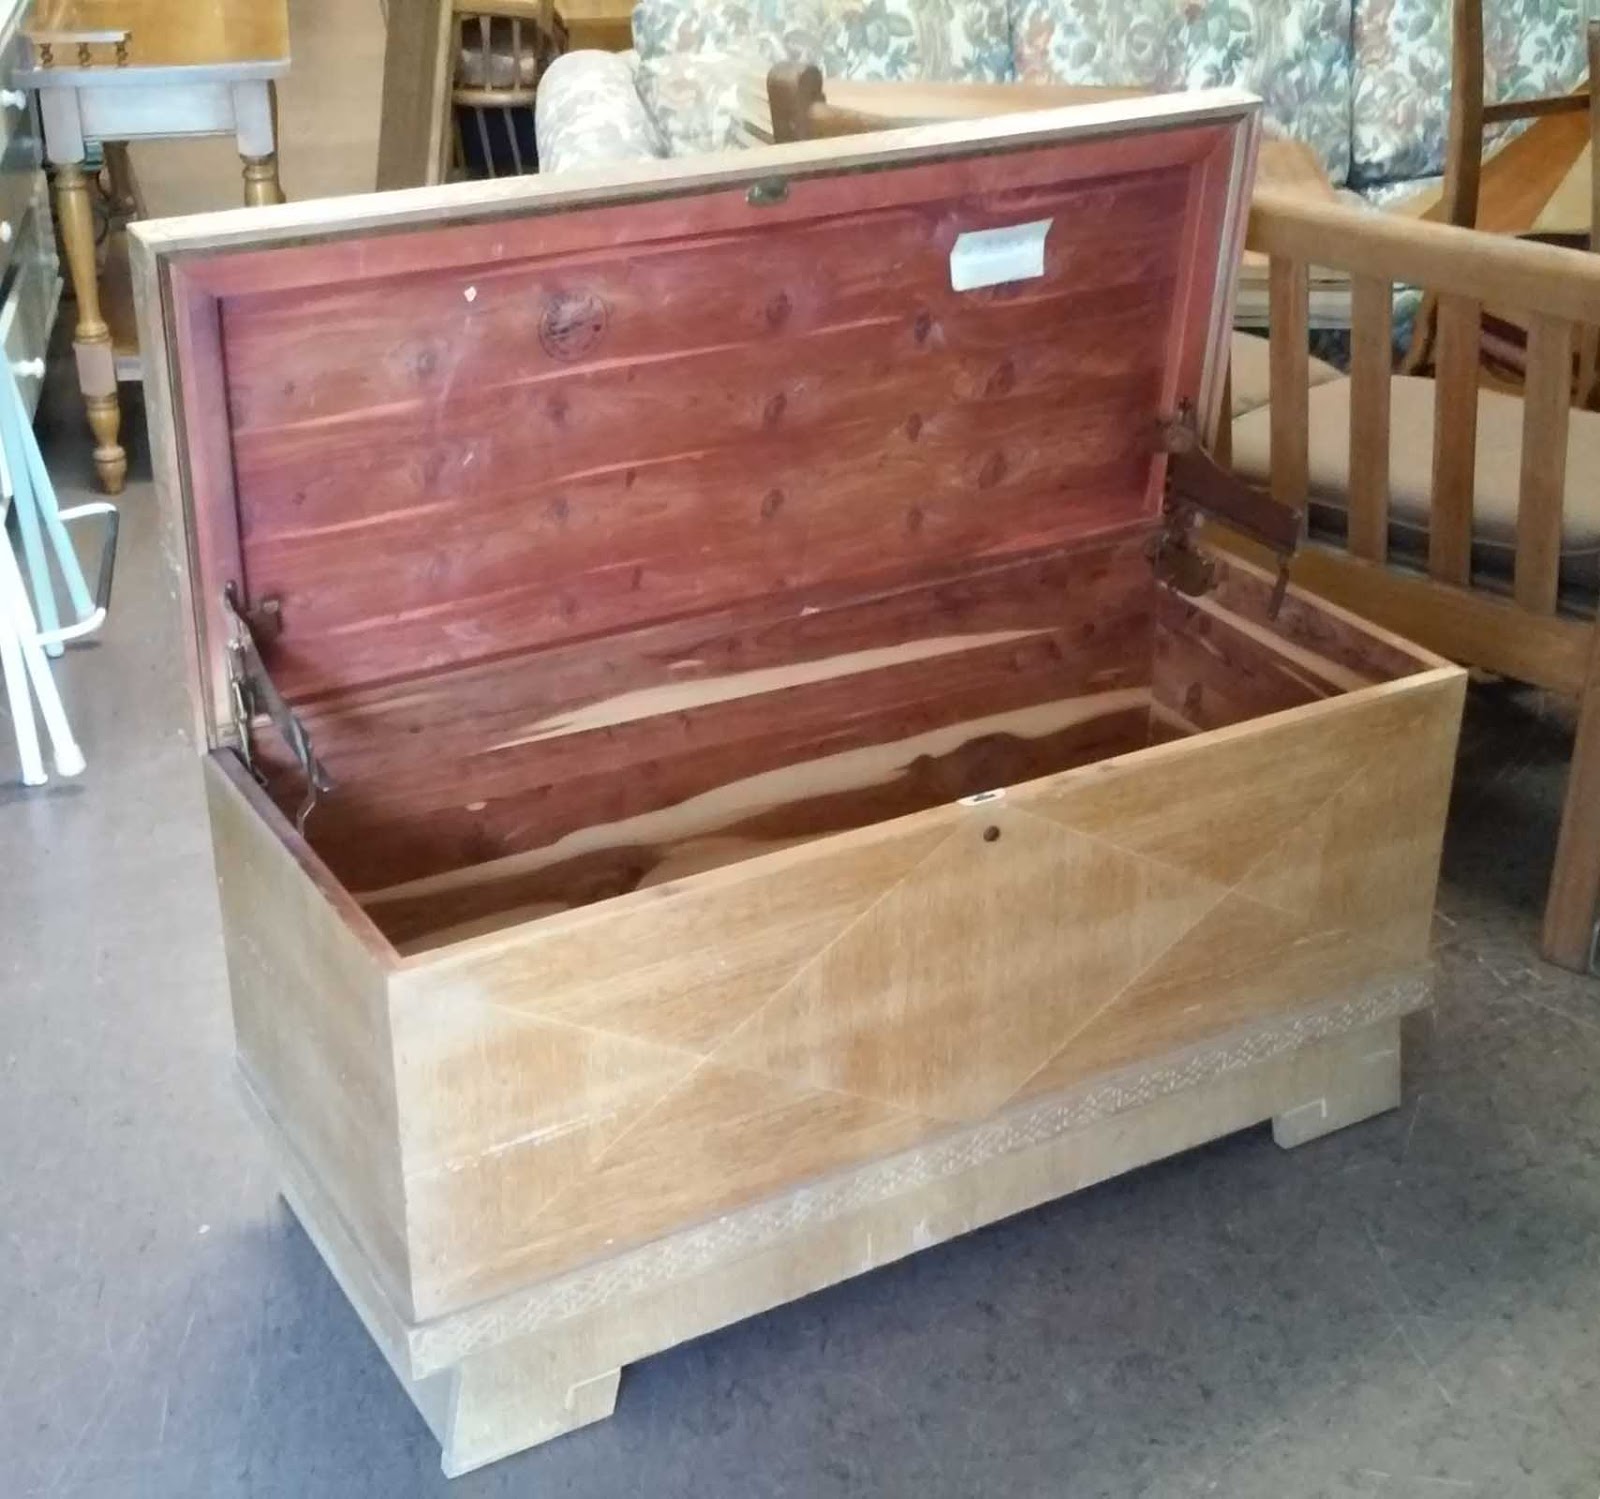 UHURU FURNITURE & COLLECTIBLES: SOLD Roos Limed Mahogany Cedar Chest - 